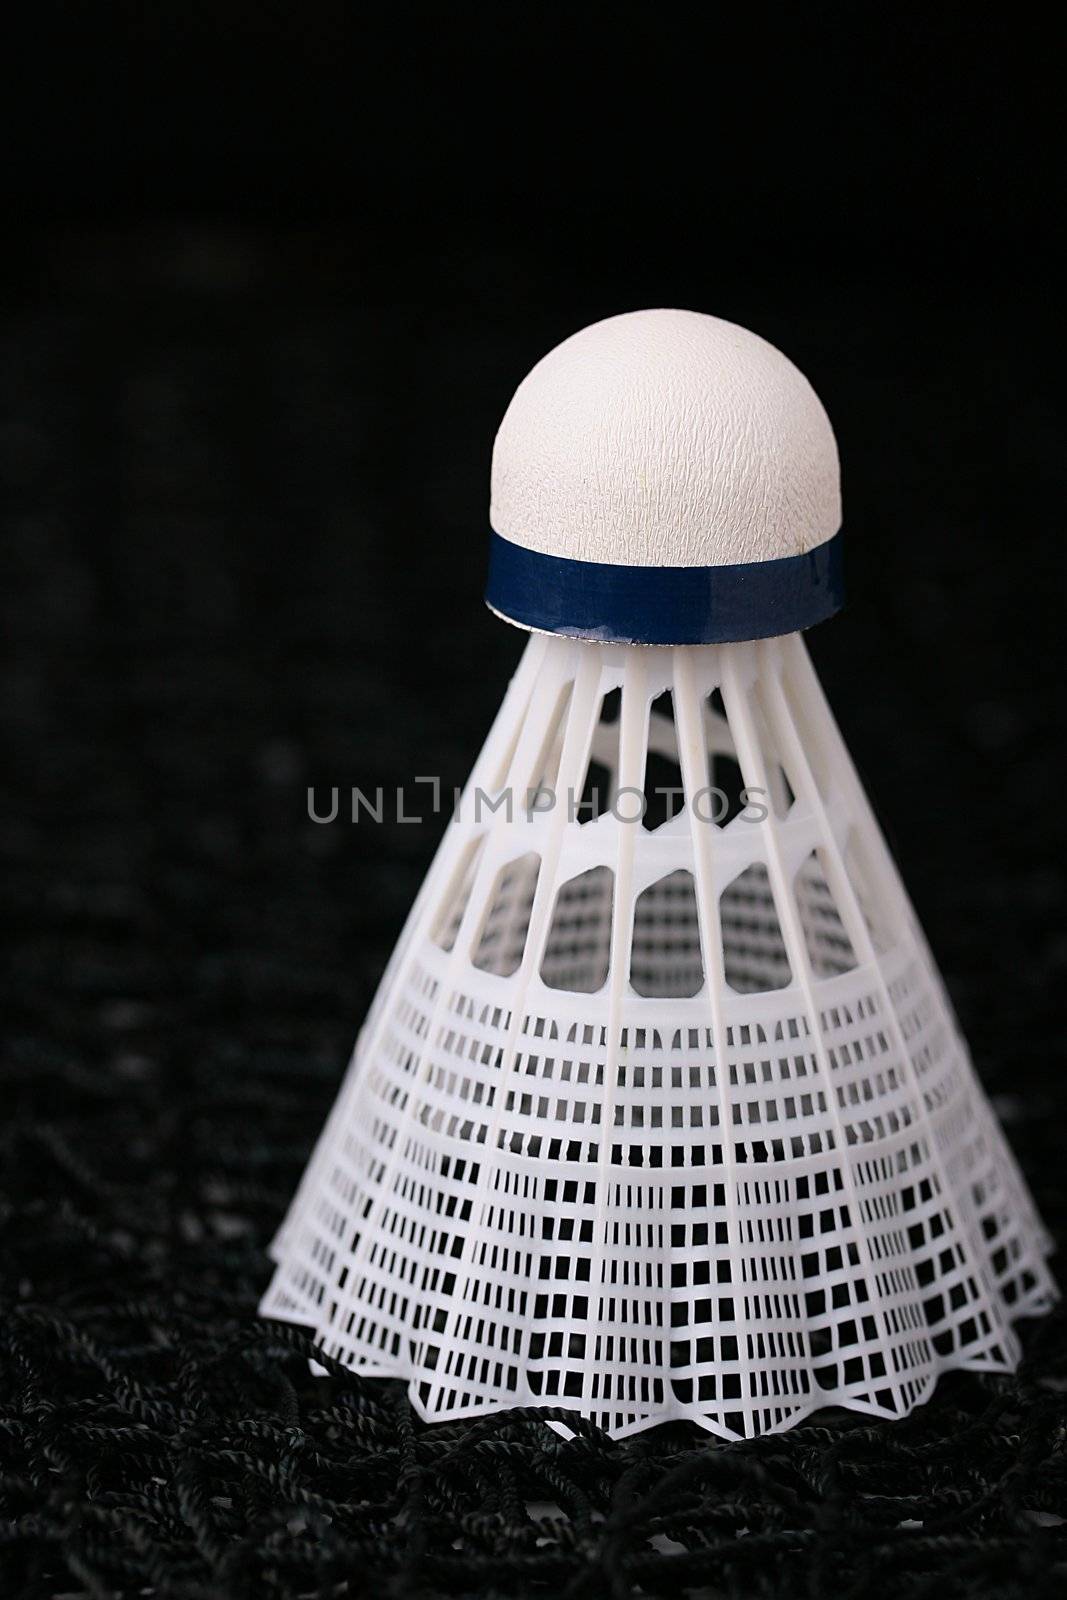 Close-up of a white synthetic shuttlecock on a badminton net.